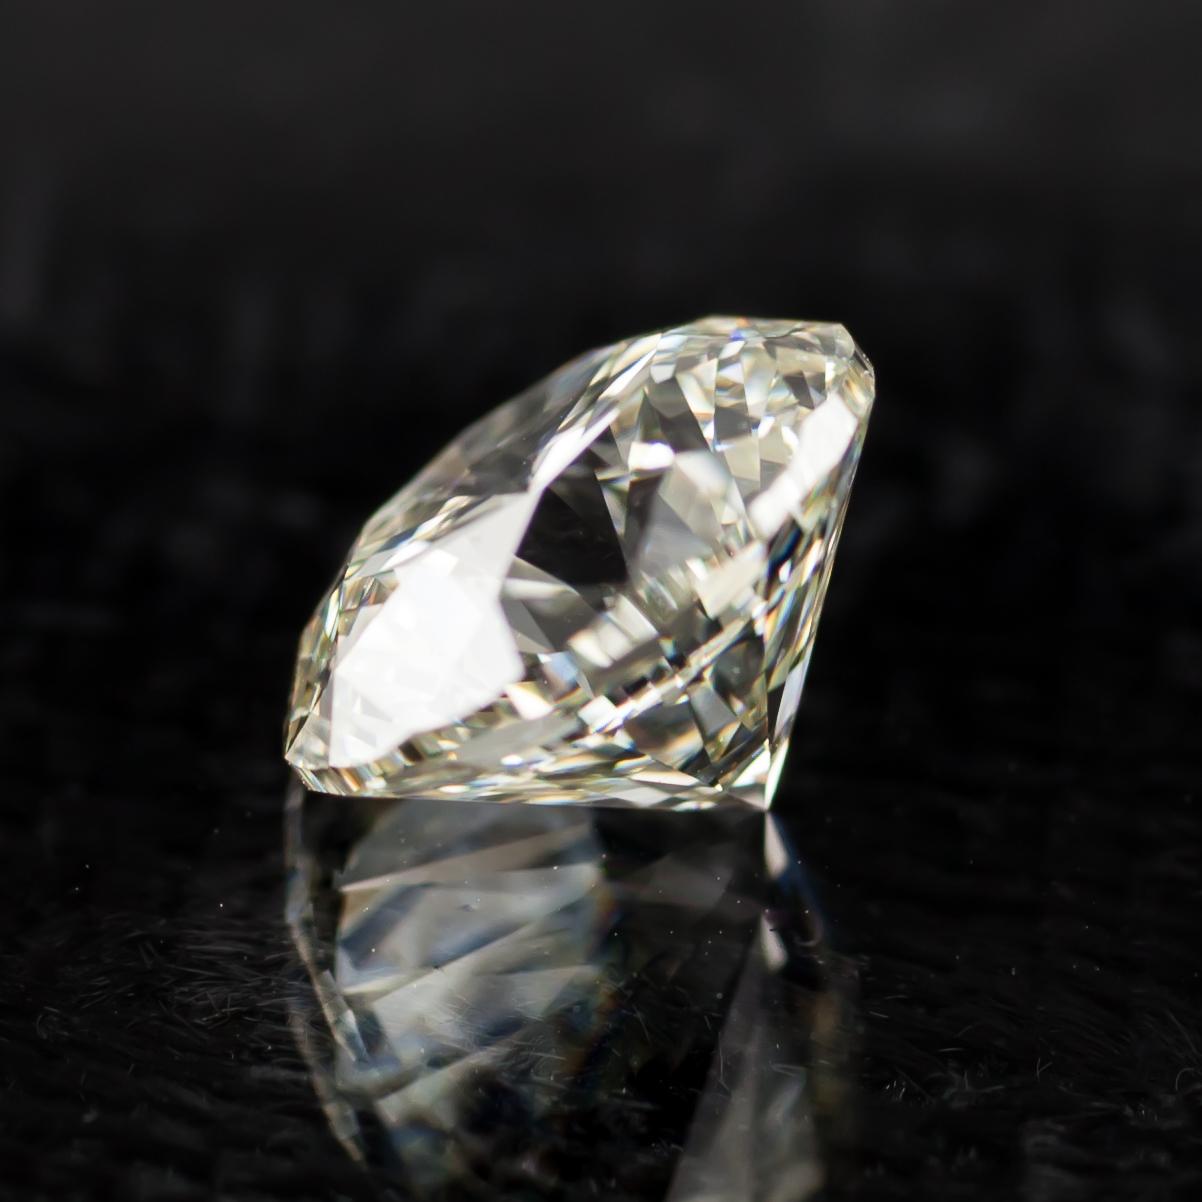 Diamond General Info
GIA Report Number: 2185397389
Diamond Cut: Round Brilliant 
Measurements: 8.98 - 9.02 x 5.78 mm

Diamond Grading Results
Carat Weight: 3.02
Color Grade: L
Clarity Grade: VS2

Additional Grading Information 
Polish: Very